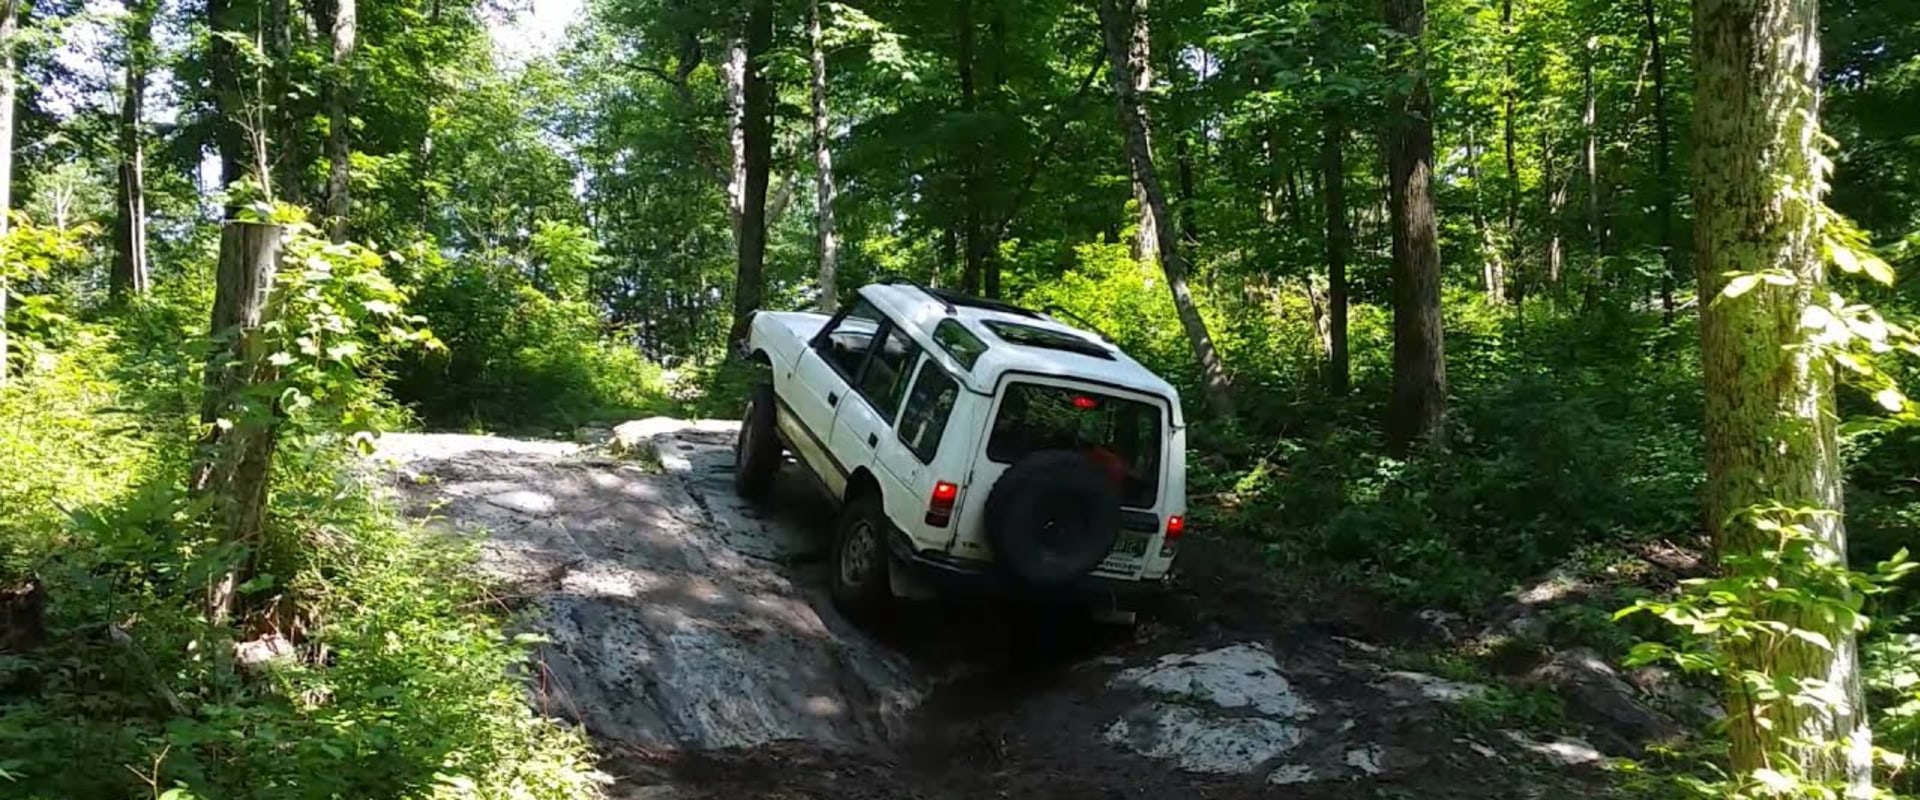 Where to Find the Best Offroad Parks in New York